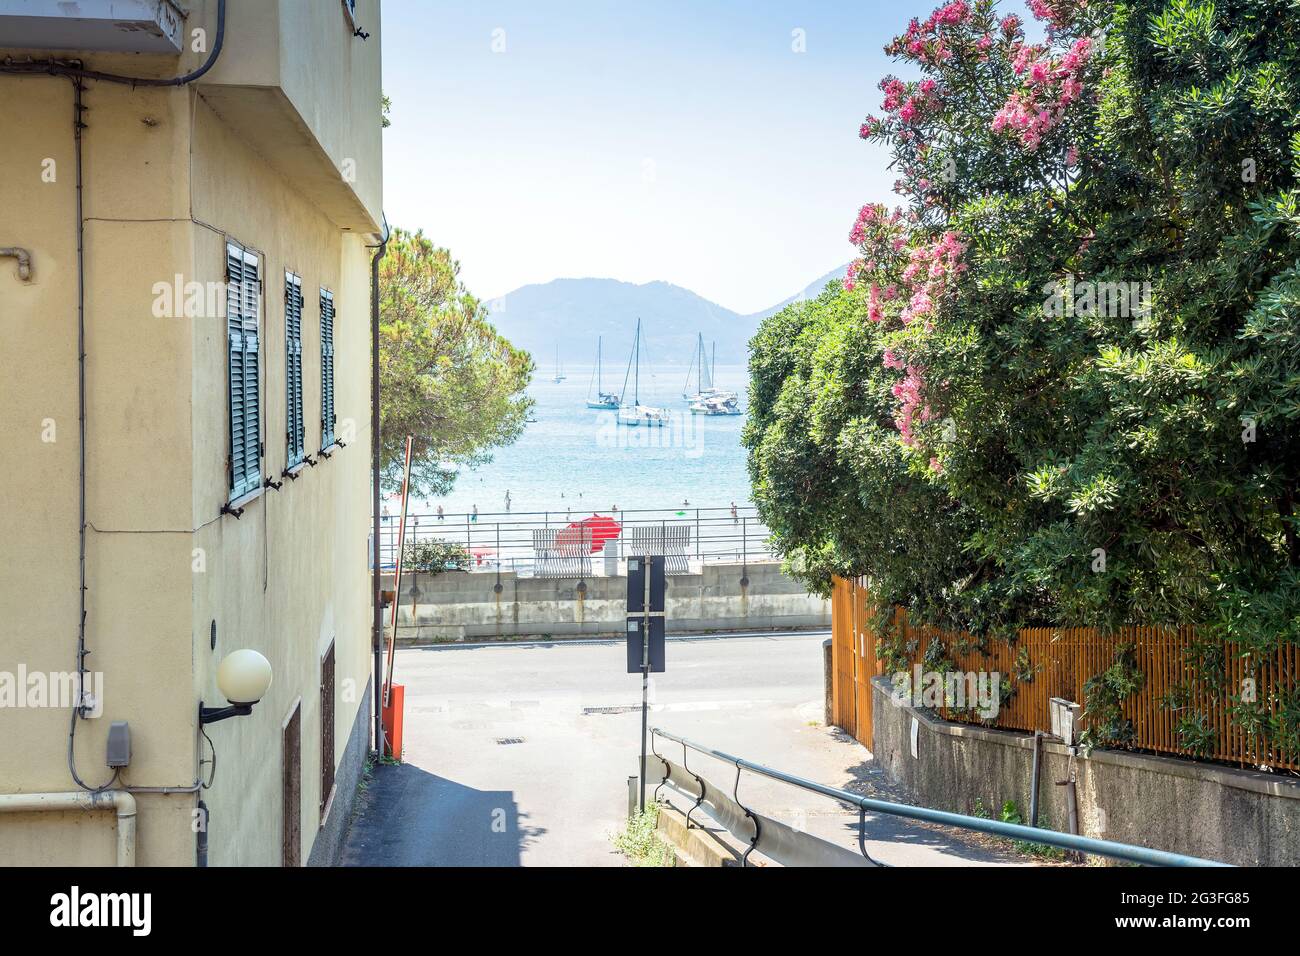 street view of beach and town in Lerici, Italy. Lerici is located in La Spezia Gulf of Poets, Liguria Stock Photo